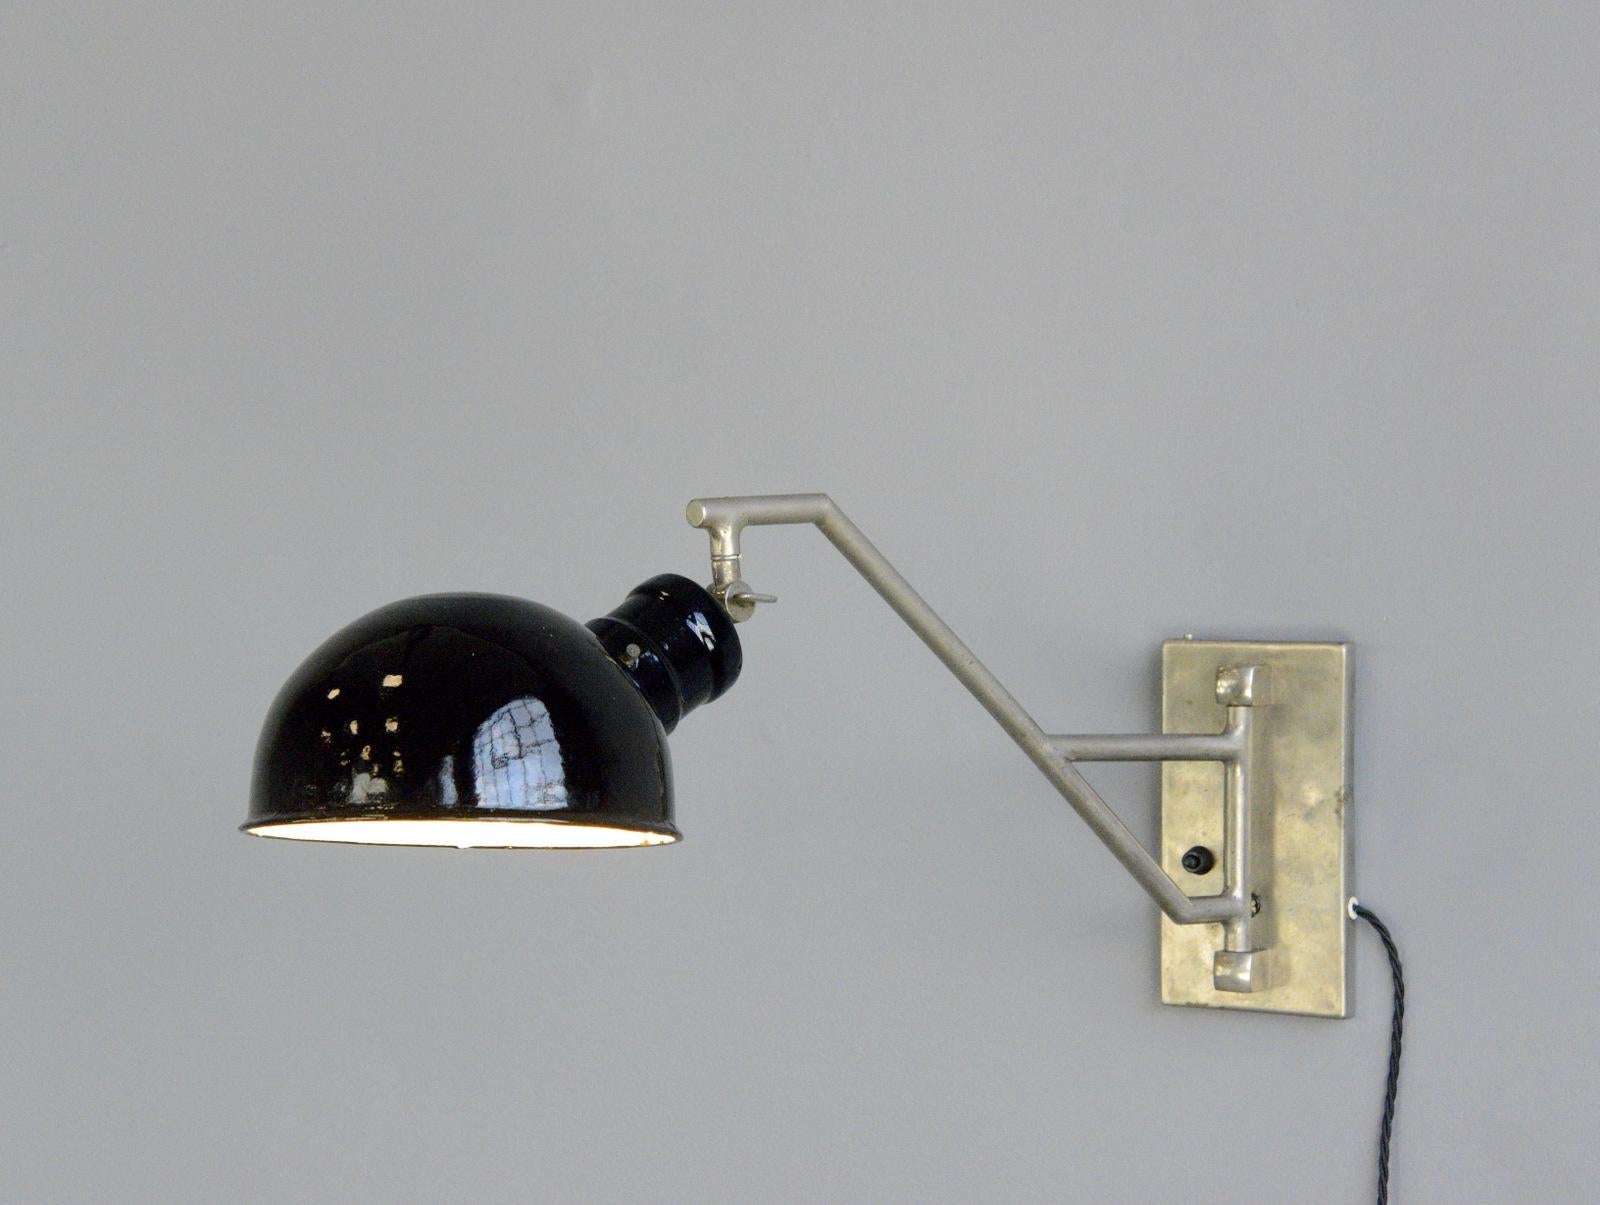 Swing out wall lamp by Kugella, circa 1930s

- Vitreous black enamel shade
- Nickel swing out arm
- On/Off switch on the wall plate
- Takes E27 fitting bulbs
- Made by Kugella, Mittelschmalkalden 
- German ~ 1930s
- Measures: 64cm deep x